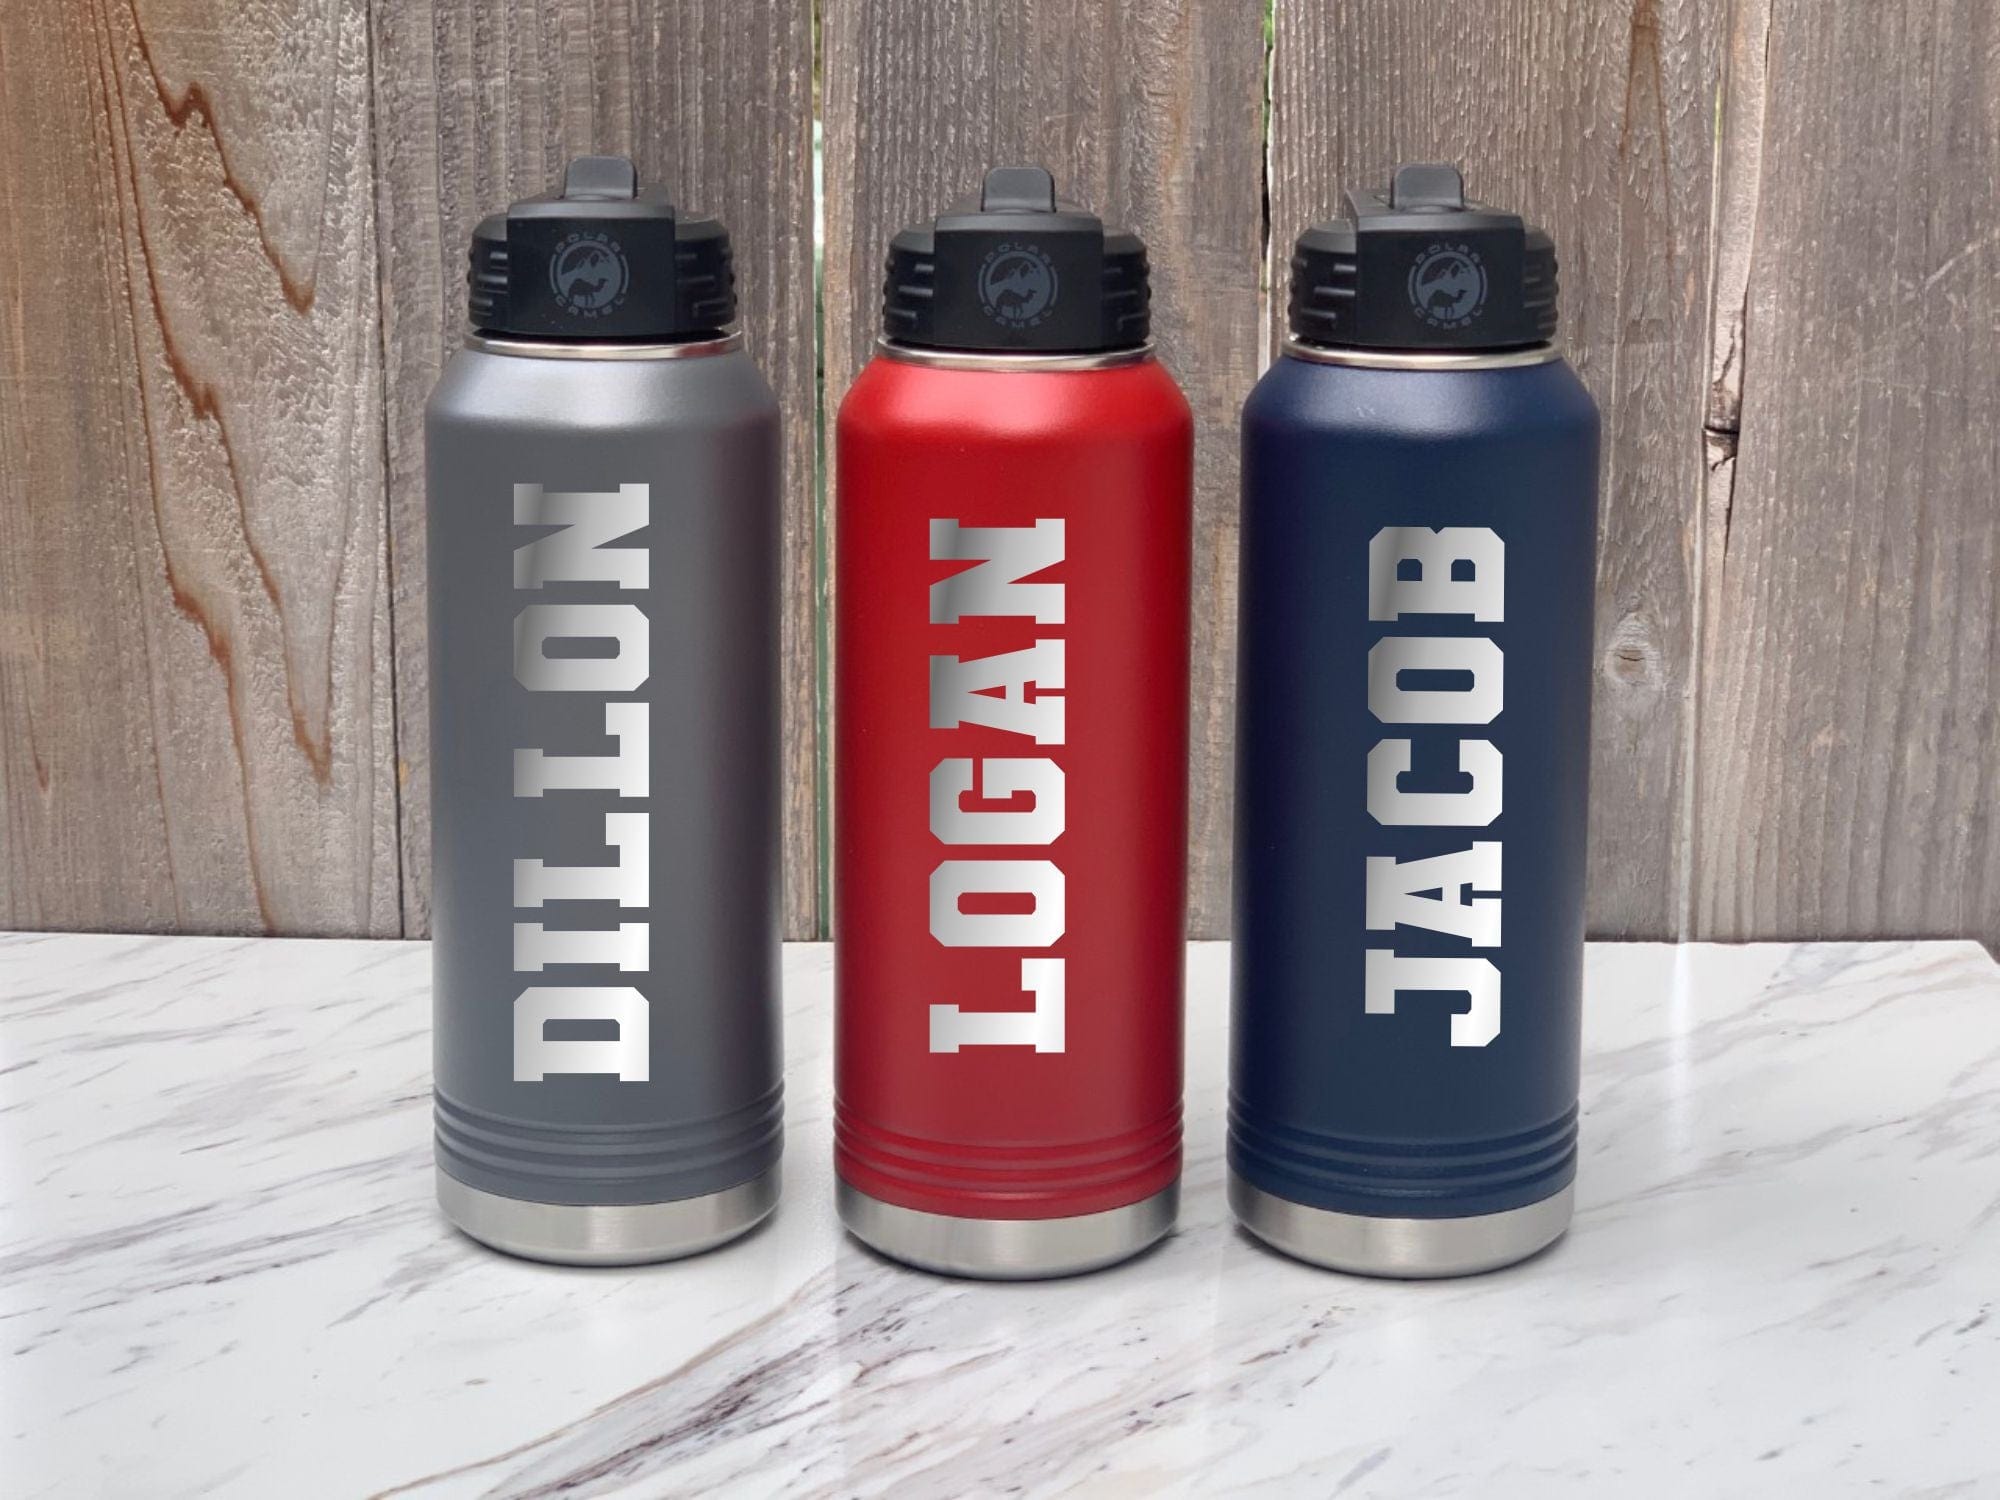 Engraved Sports Water Bottle Personalized